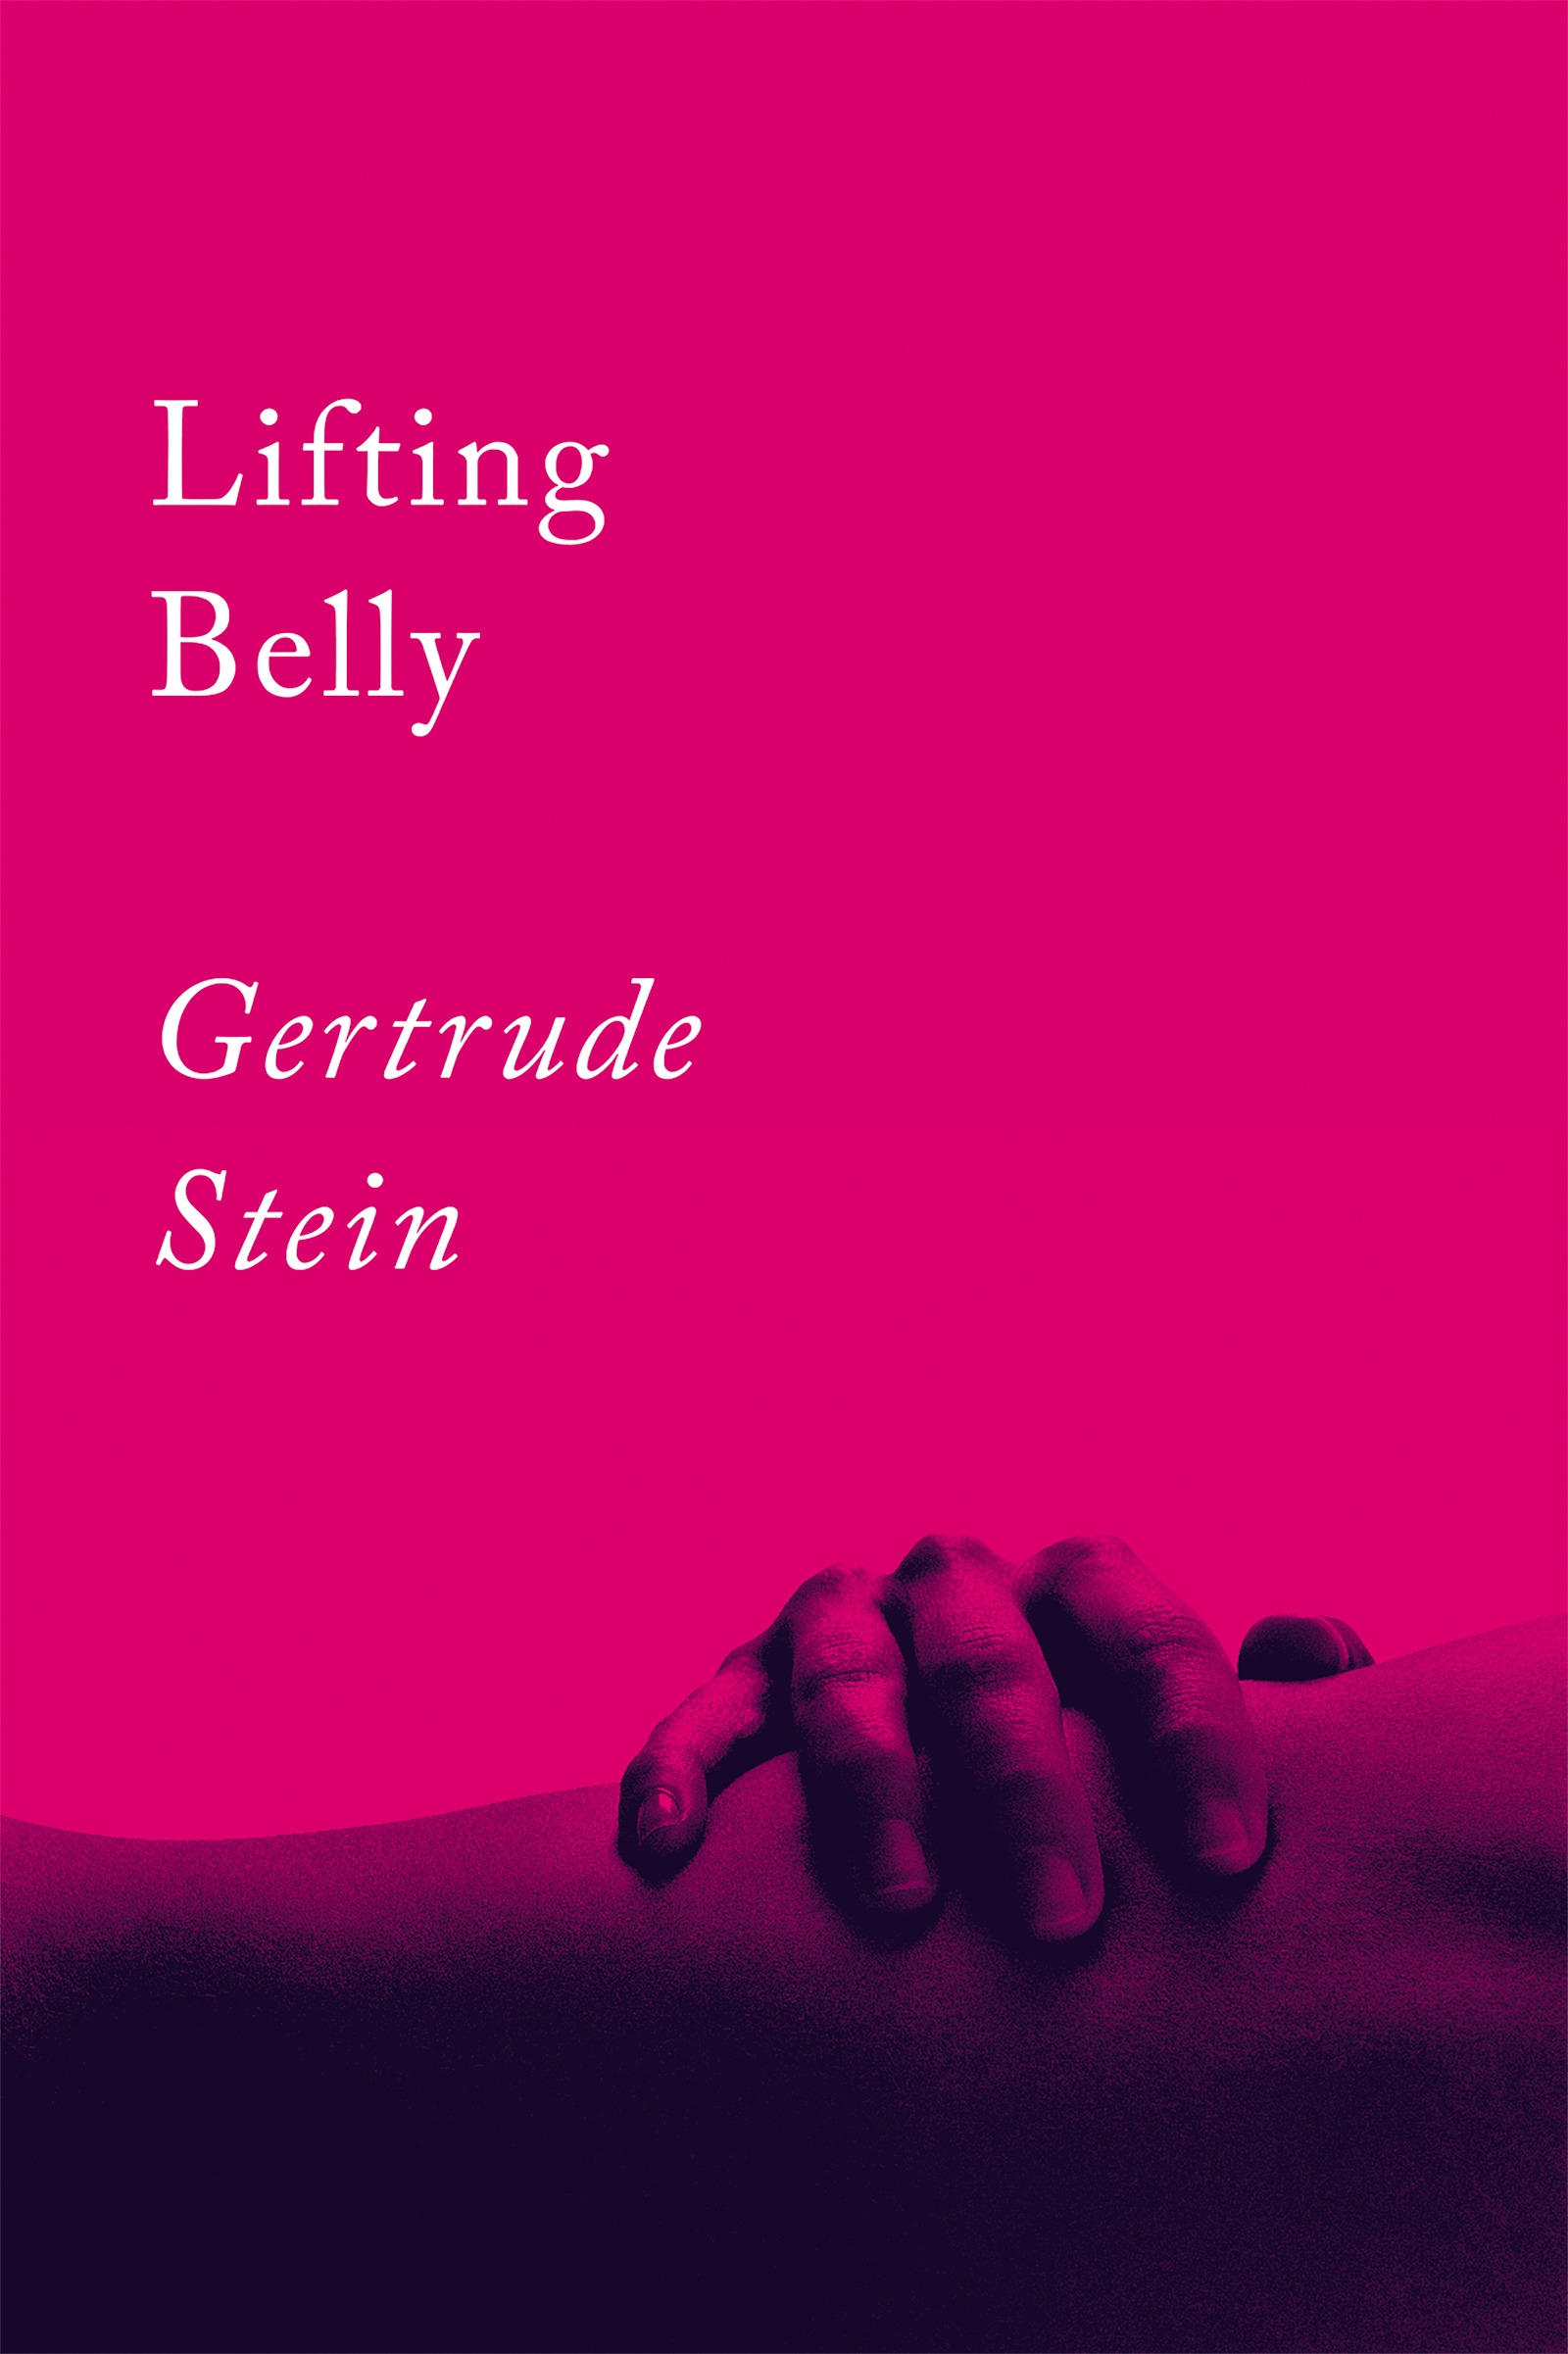 Lifting Belly by Gertrude Stein - Penguin Books Australia